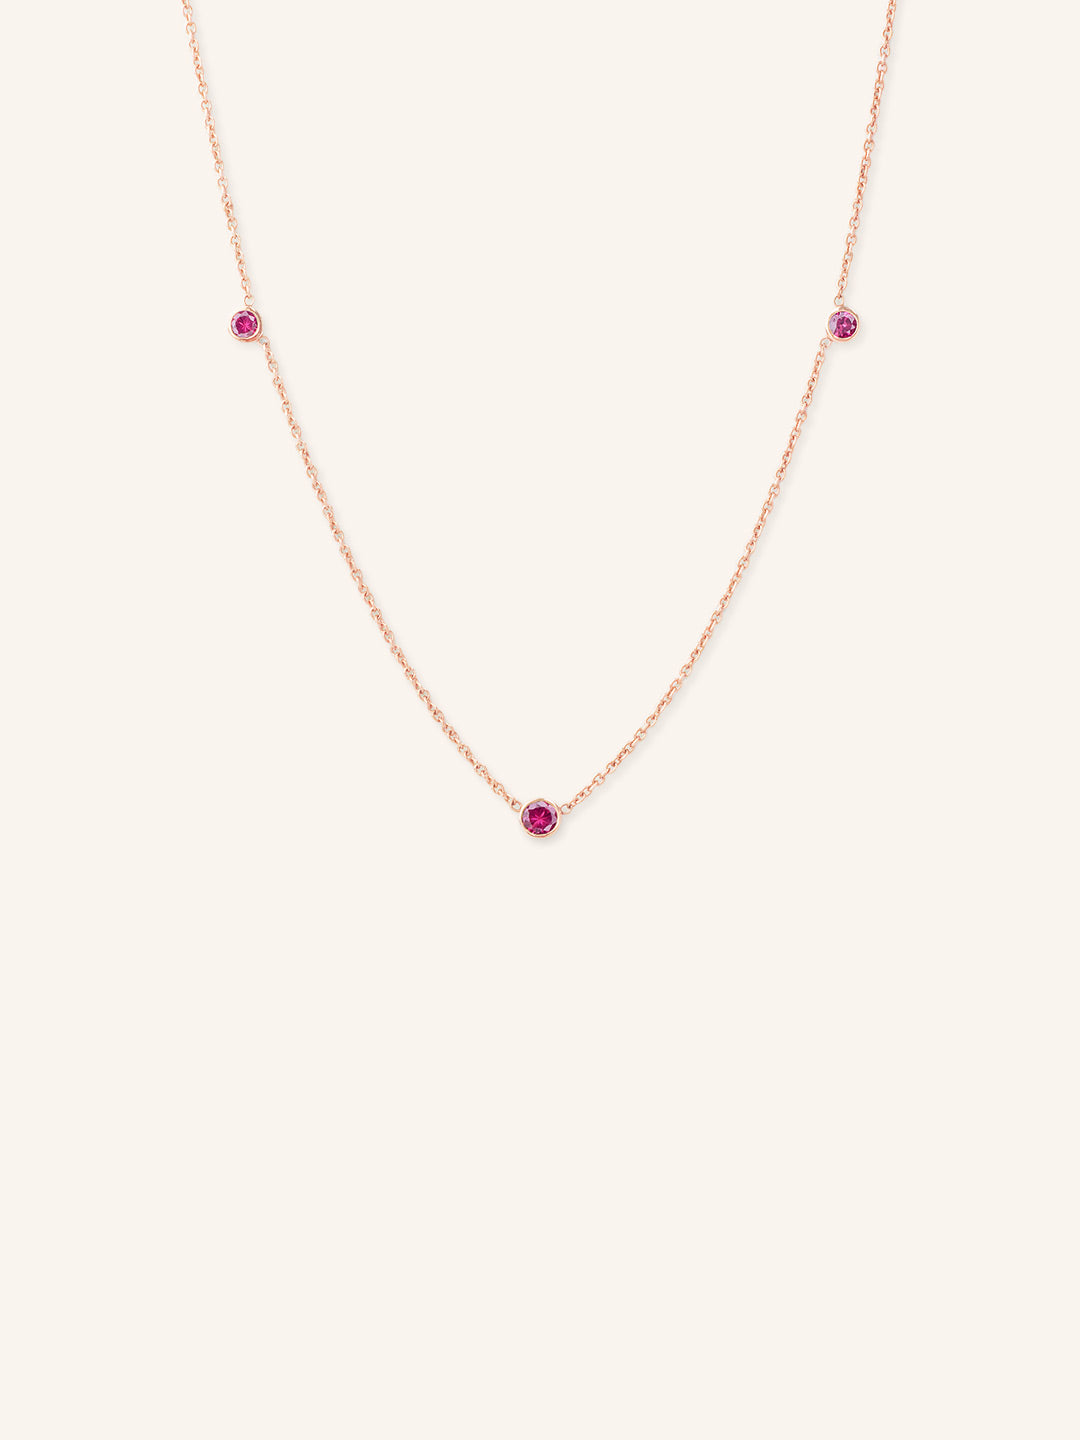 Orion's Ruby Necklace